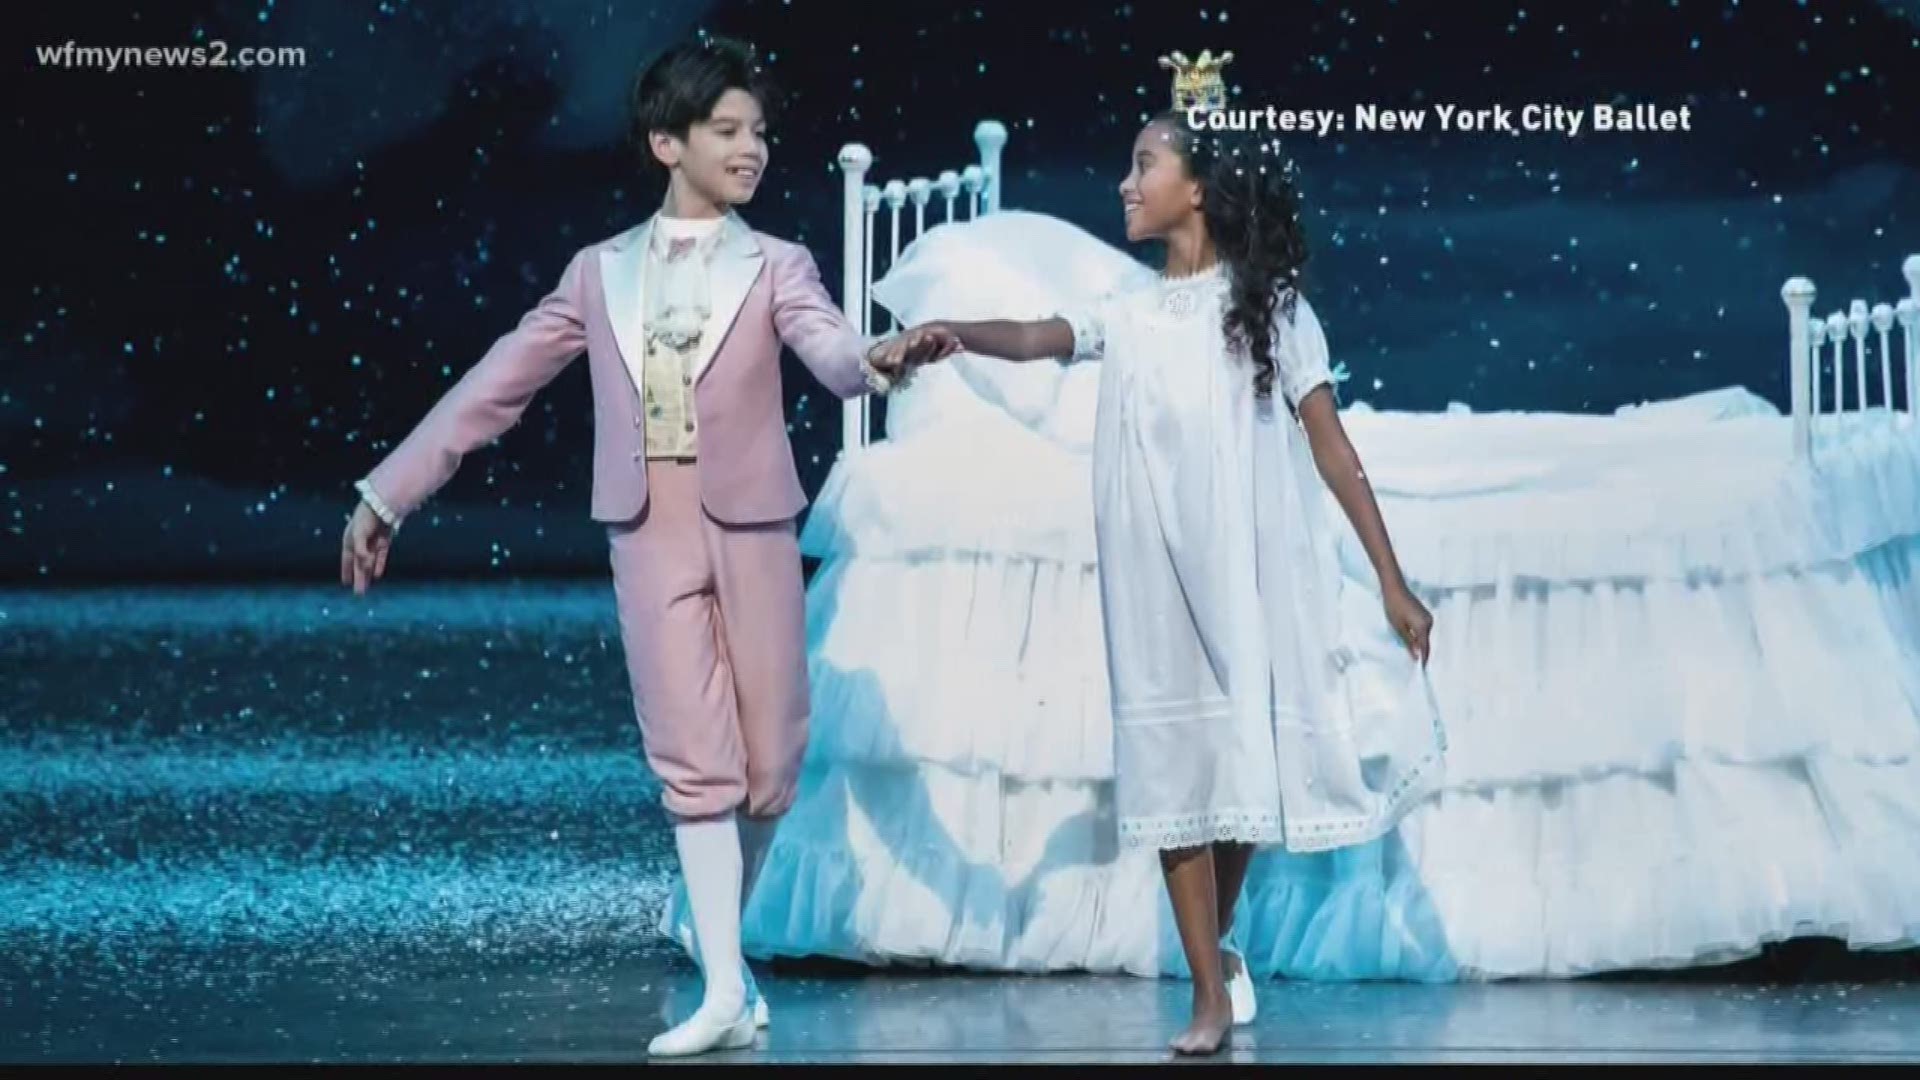 Greensboro ballet dancers react to first black girl cast as lead in New York City Ballet’s “The Nutcracker”